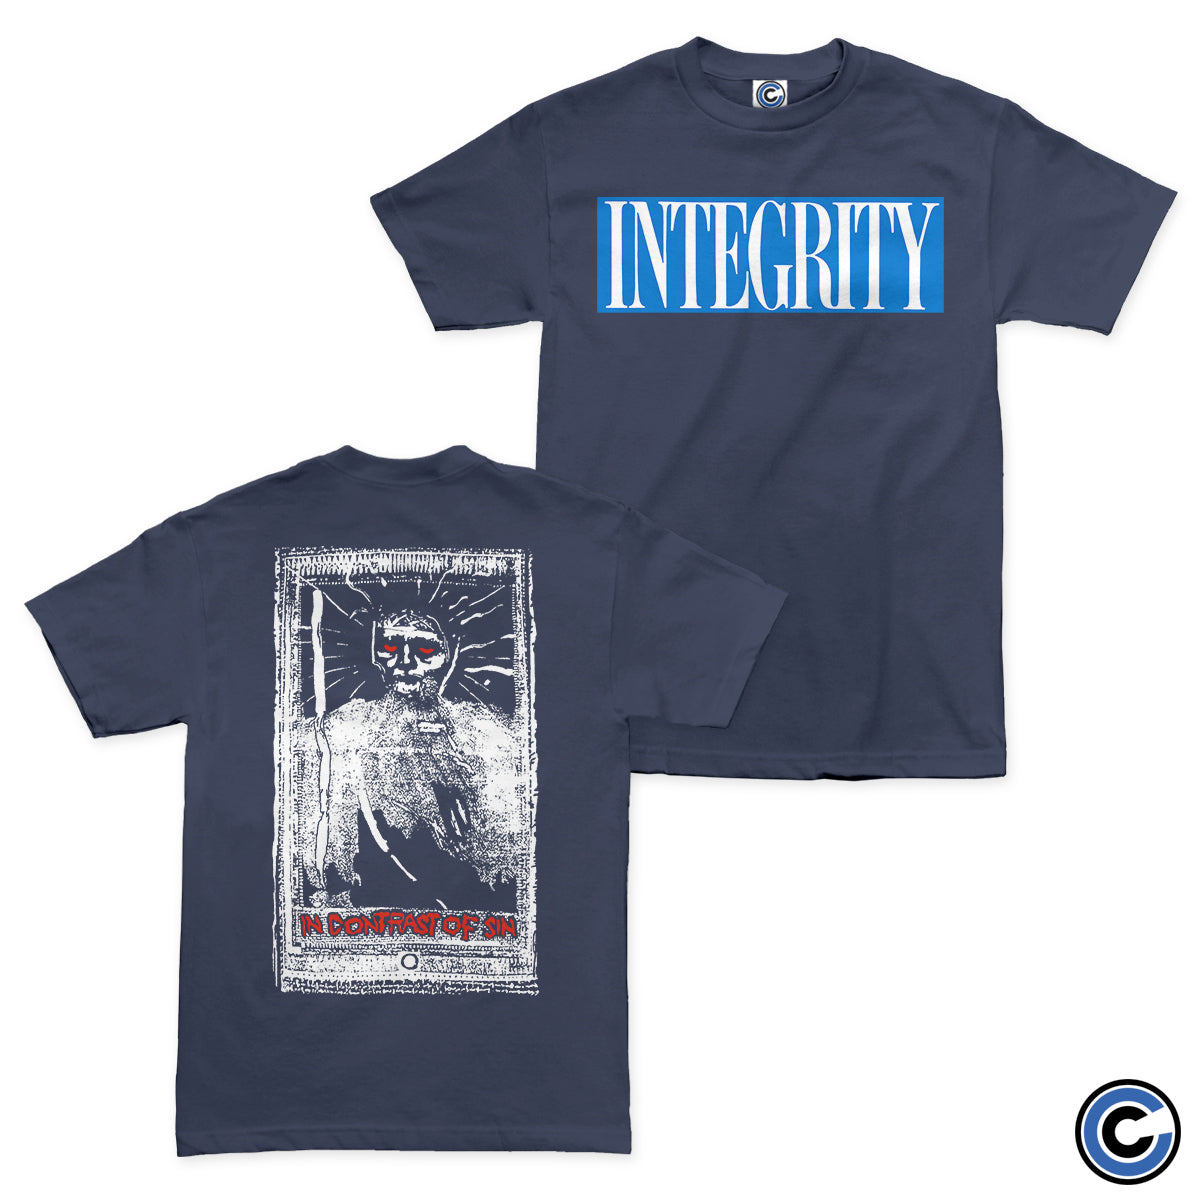 Integrity "In Contrast" Shirt